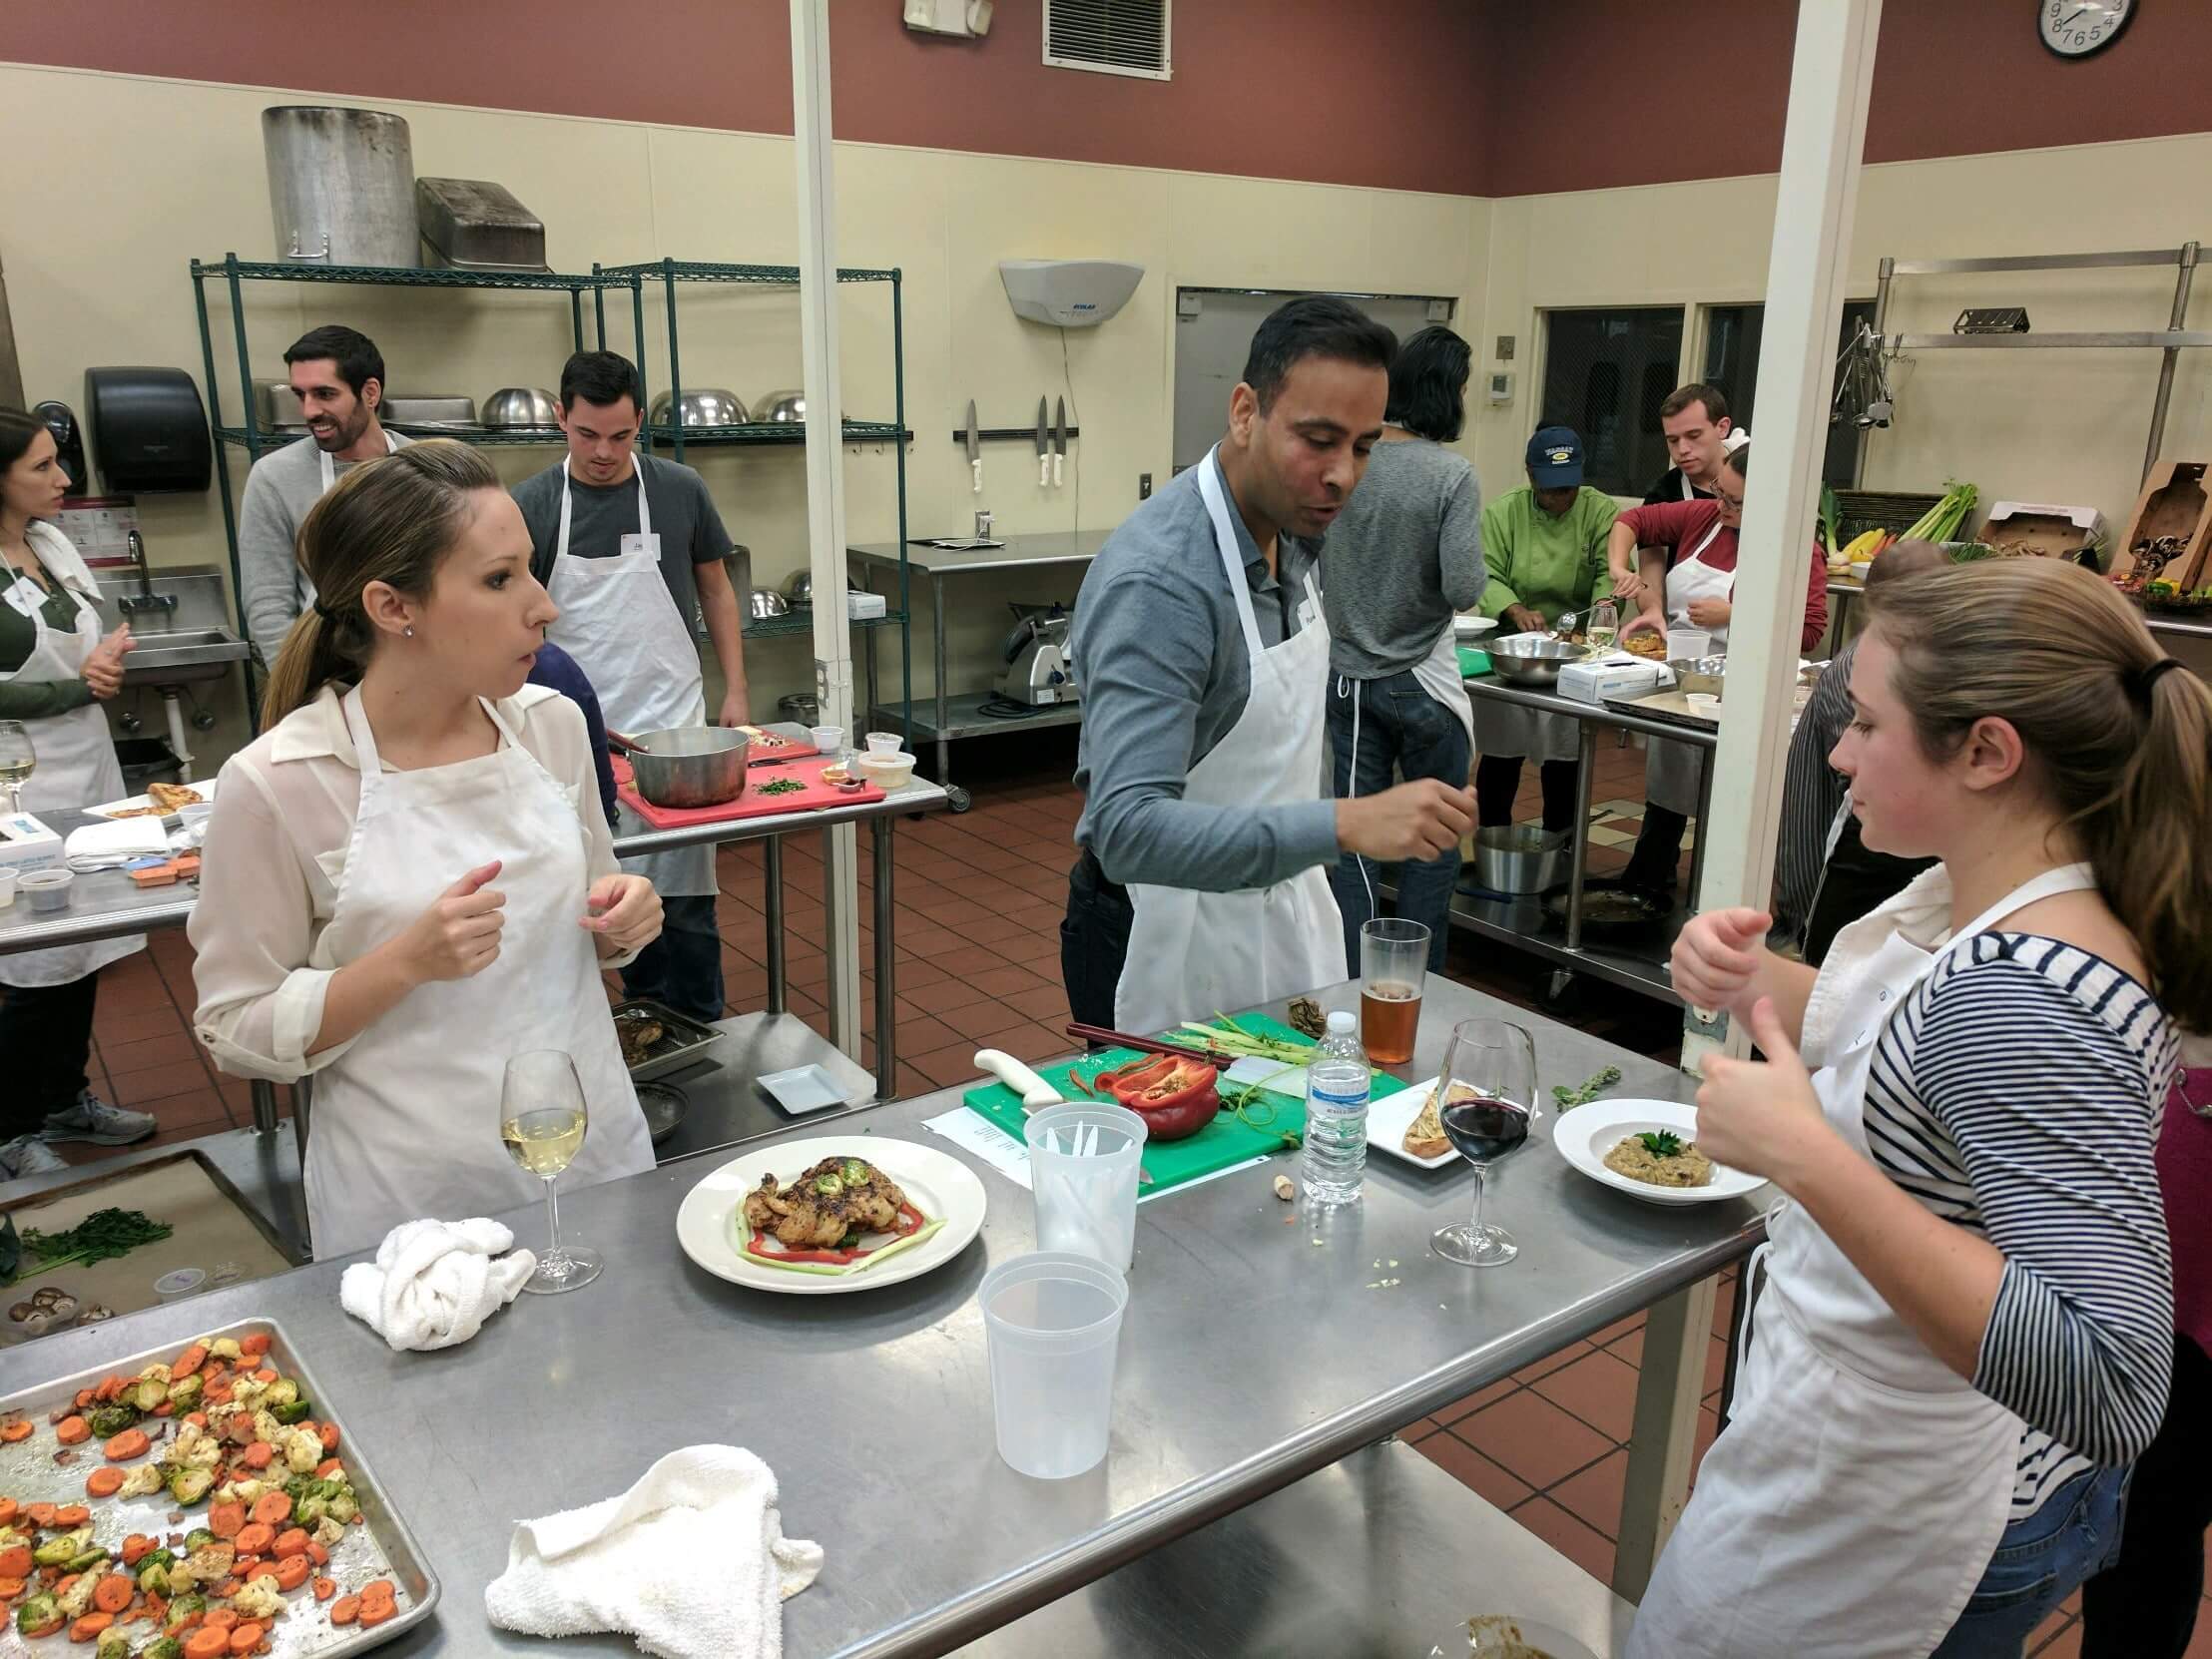 Culinary Team Building in action in our Atlanta event kitchen.